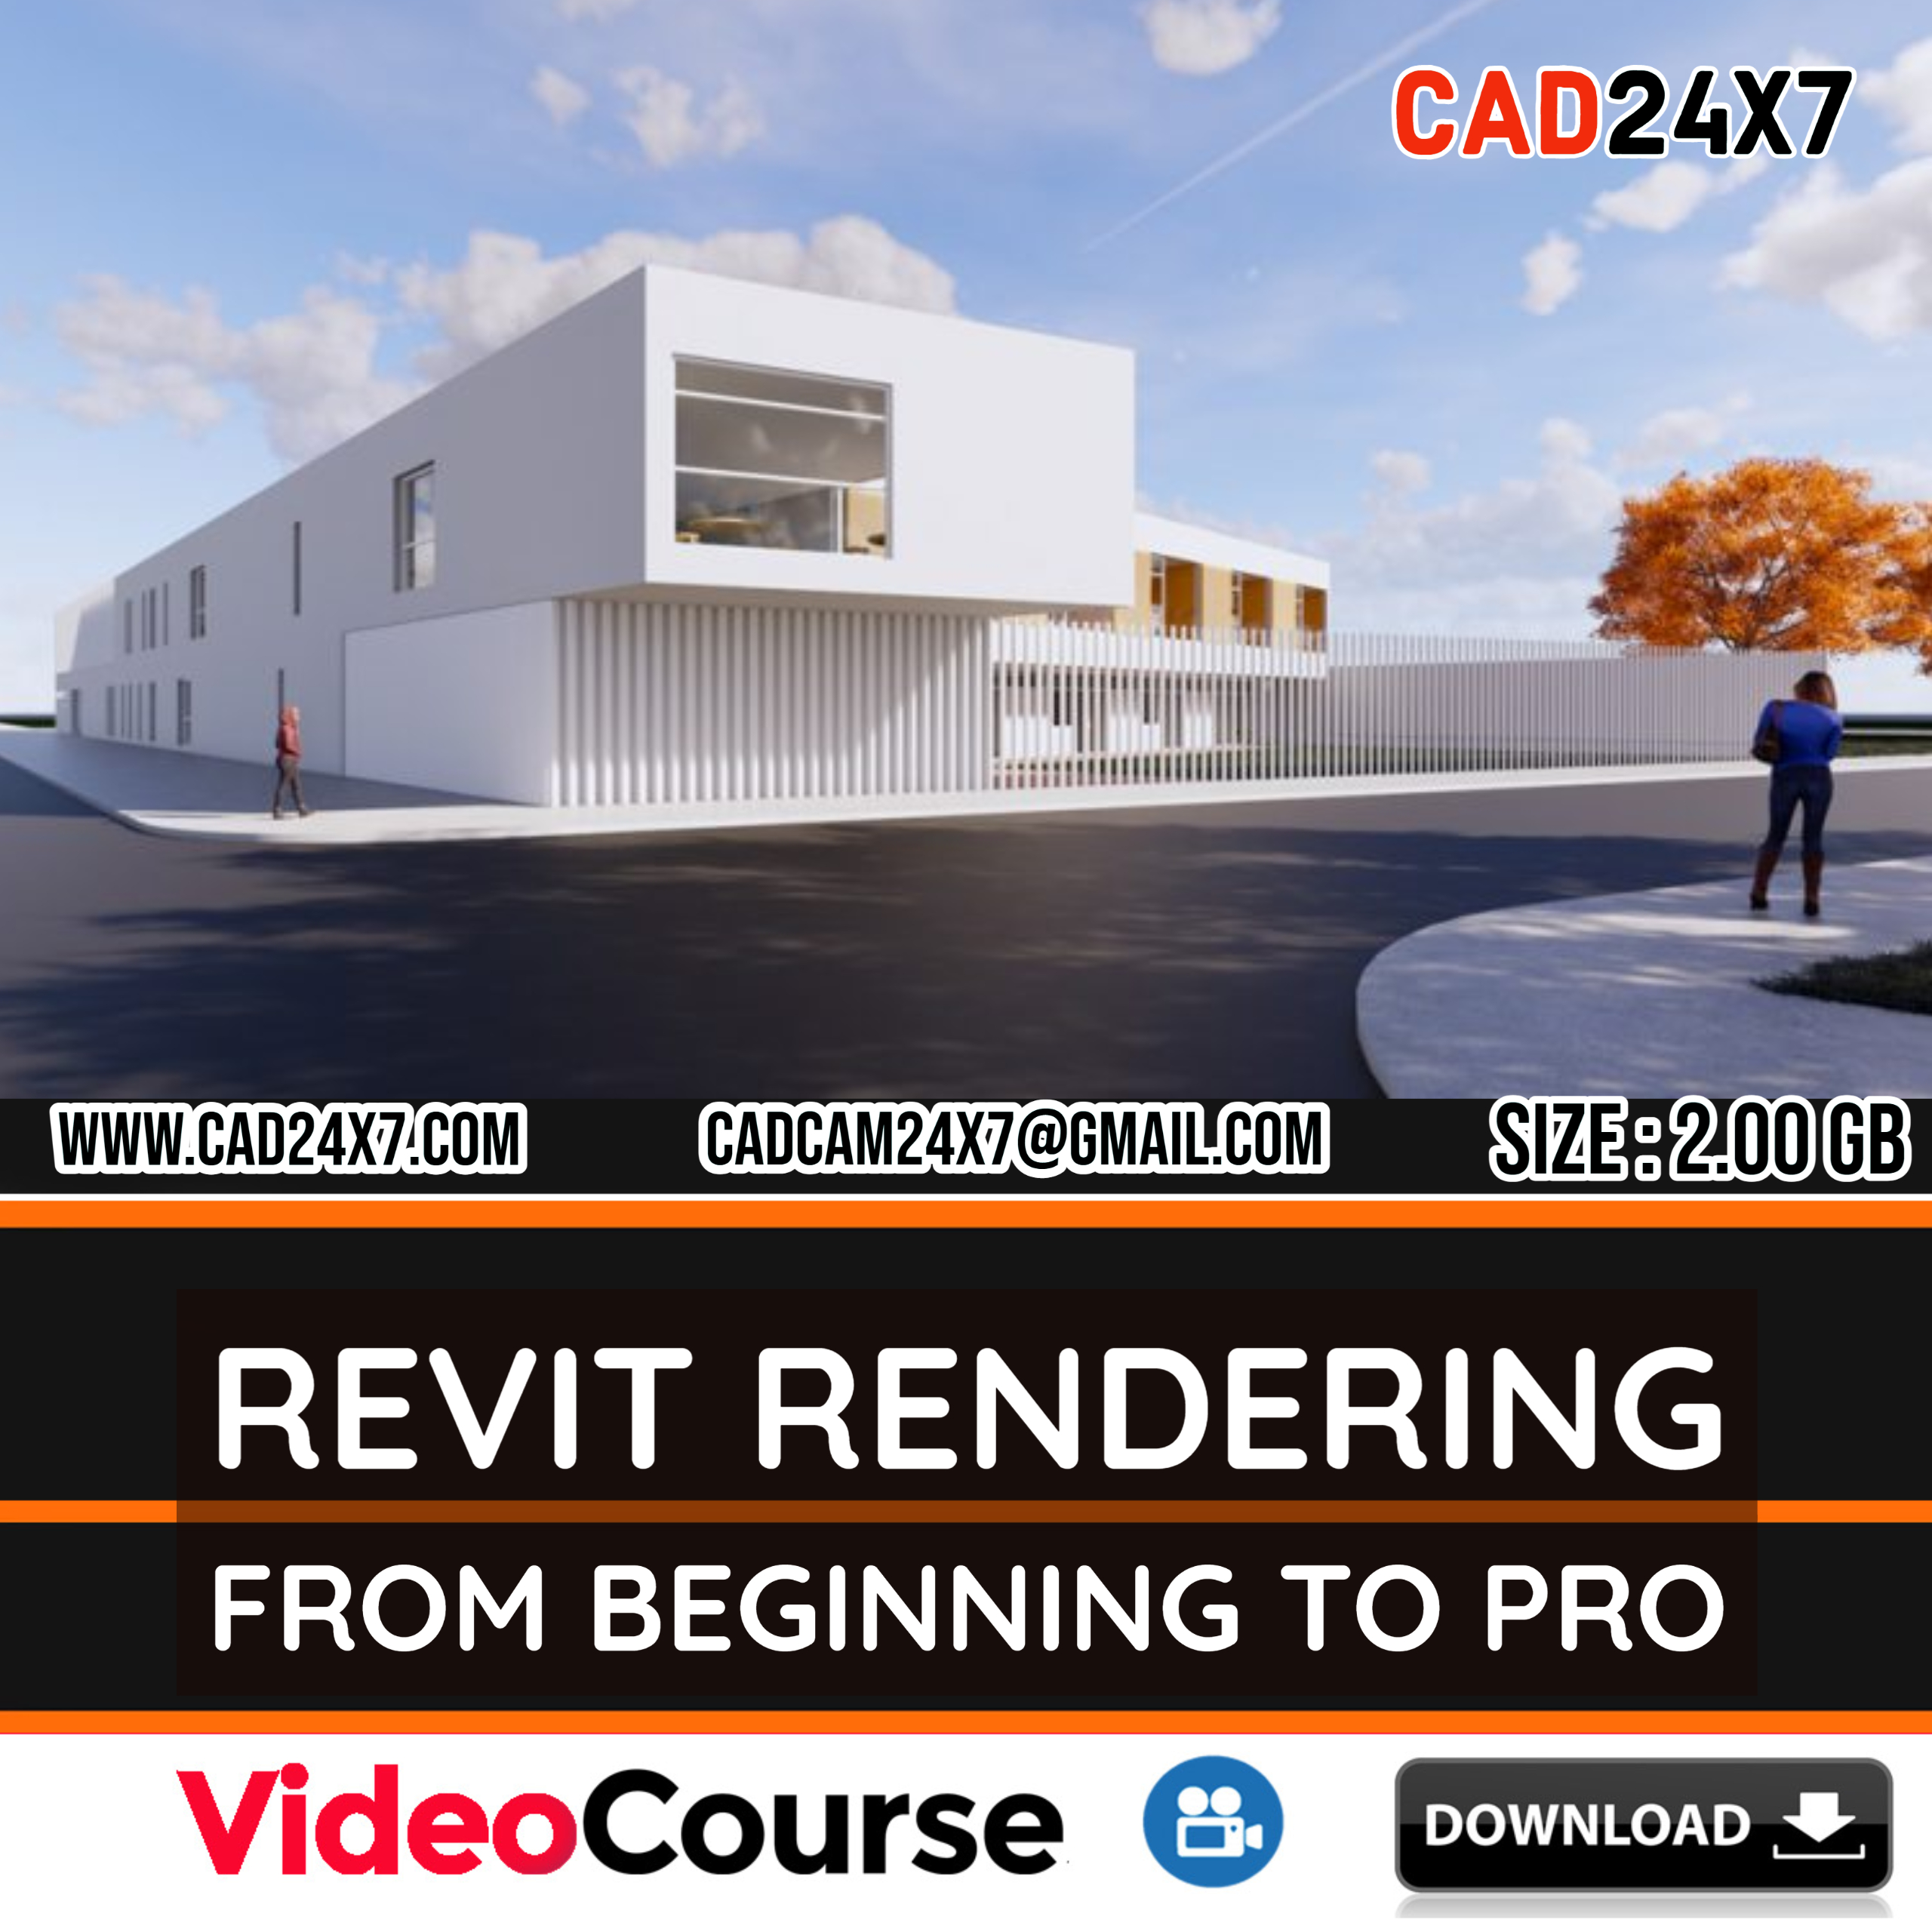 Revit-Rendering-from-beginning-to-Pro